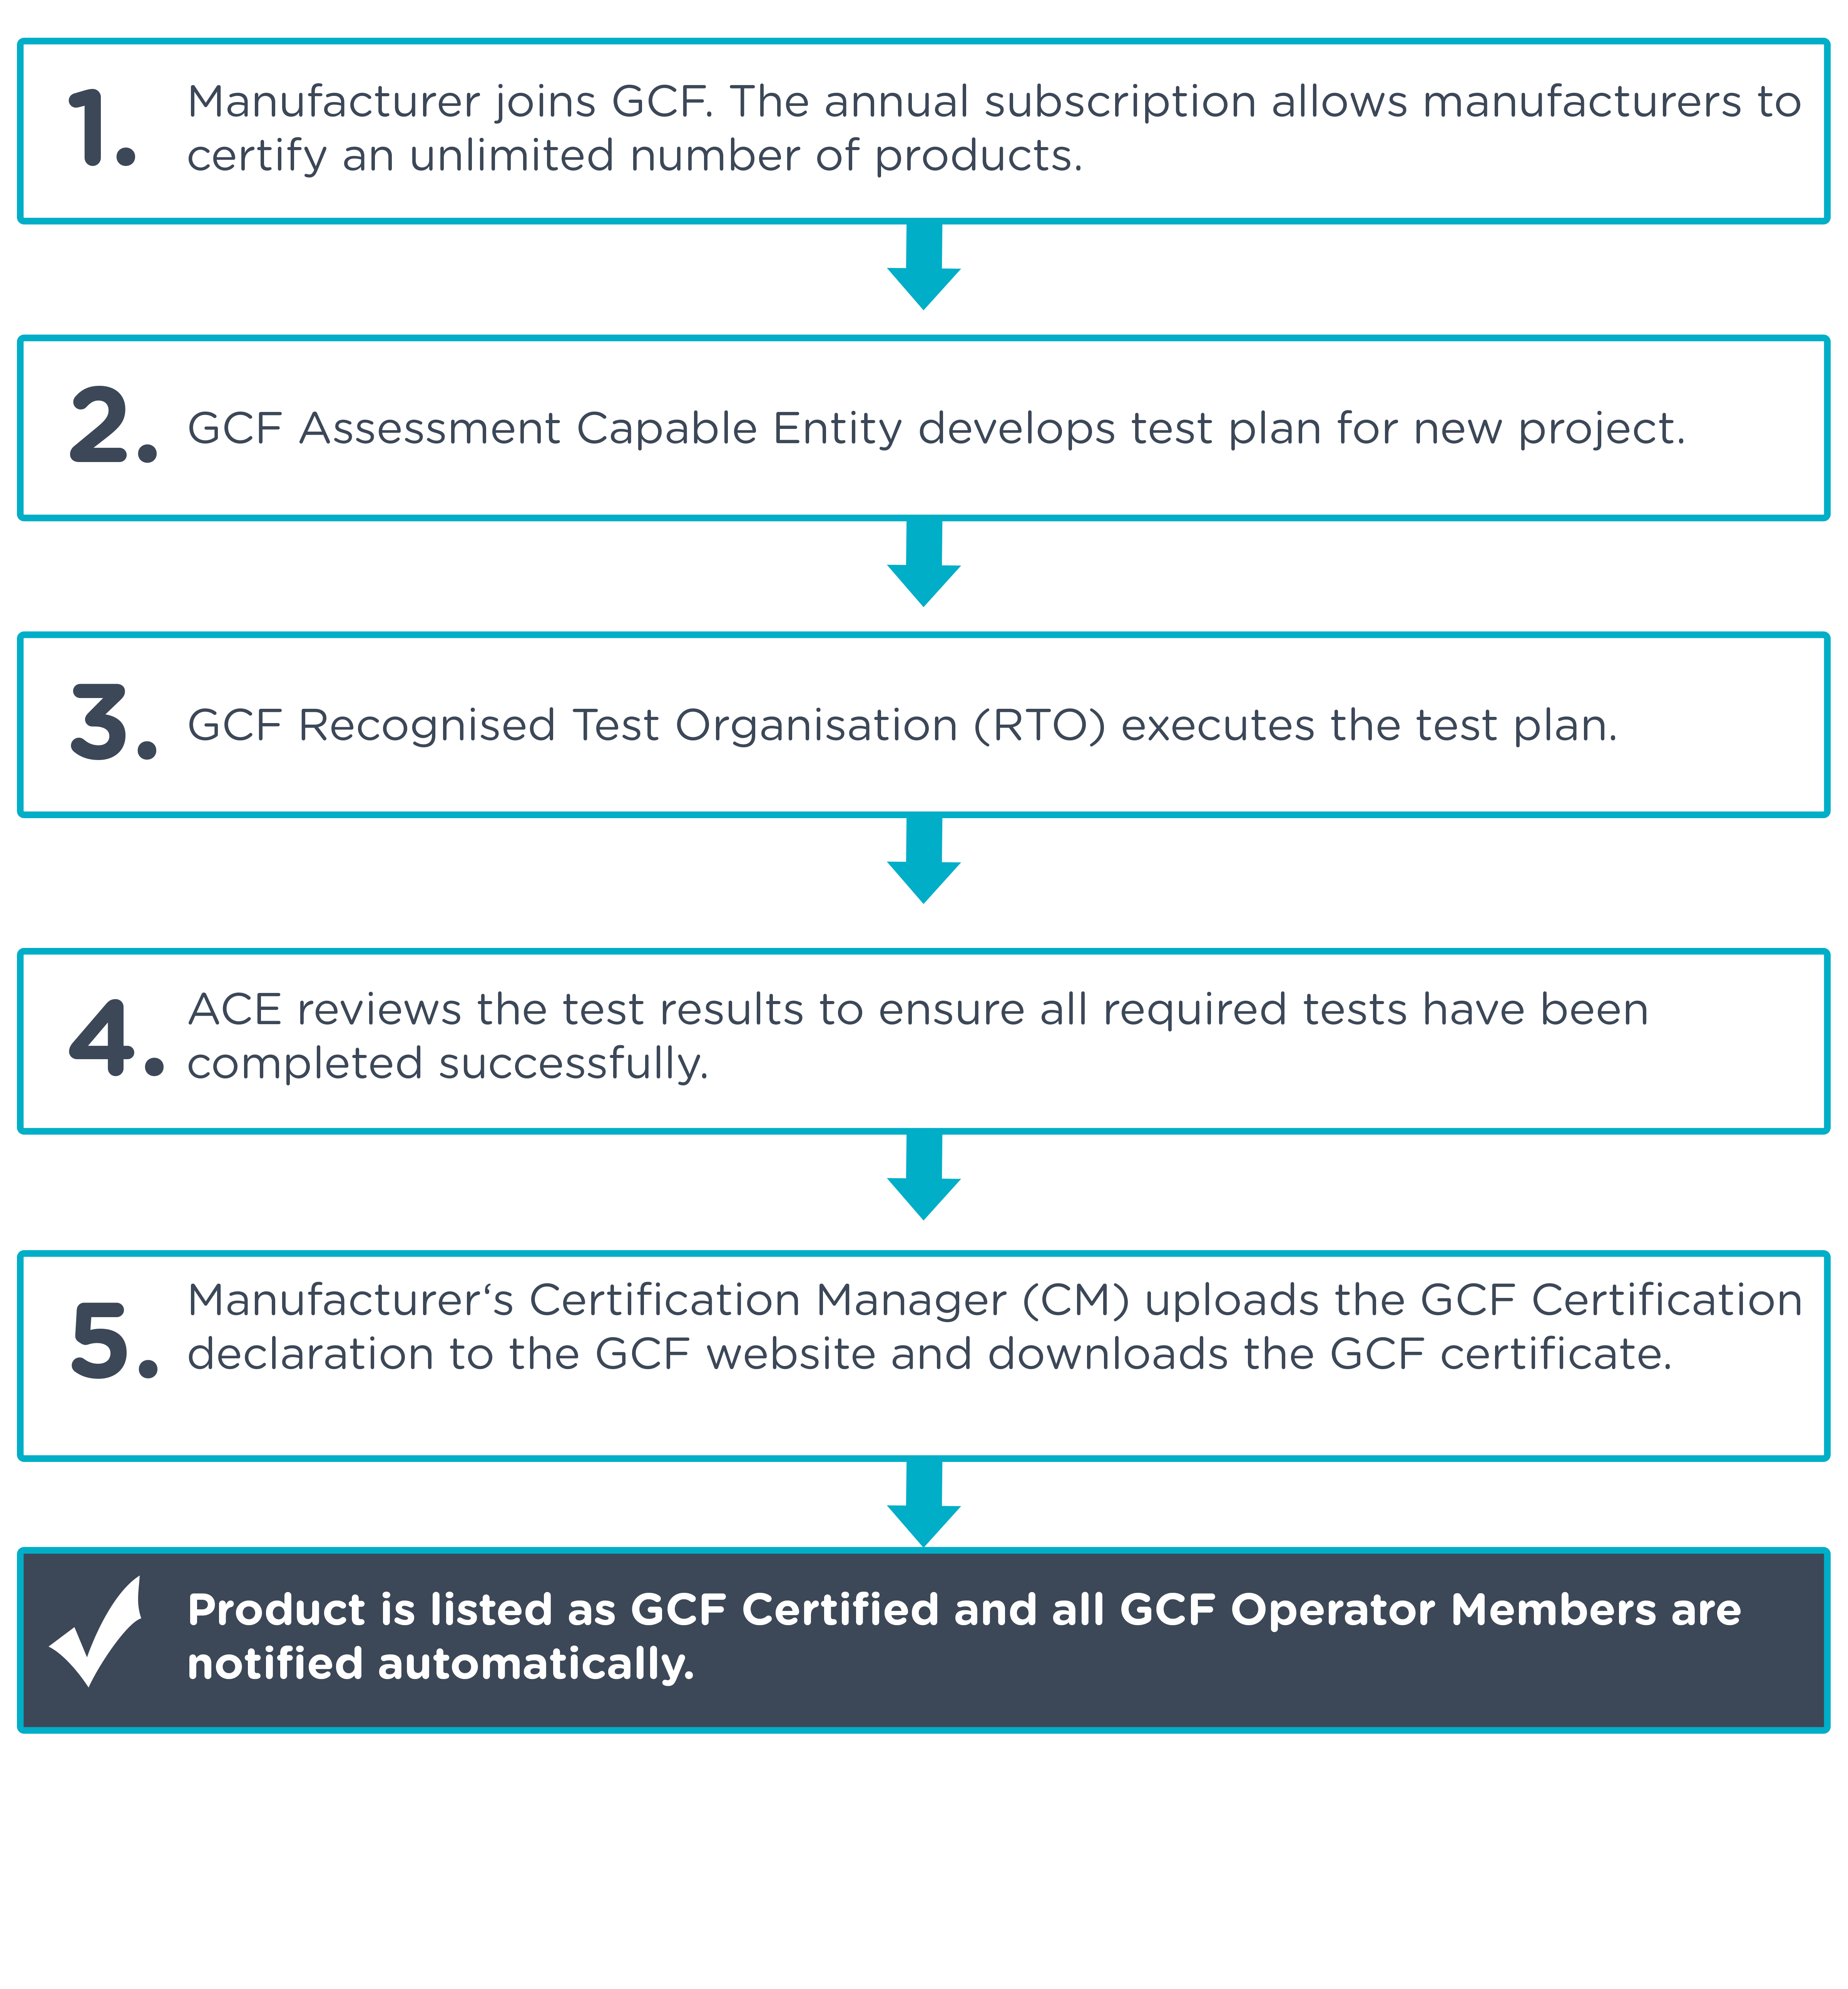 The process to GCF certification (show graphic)